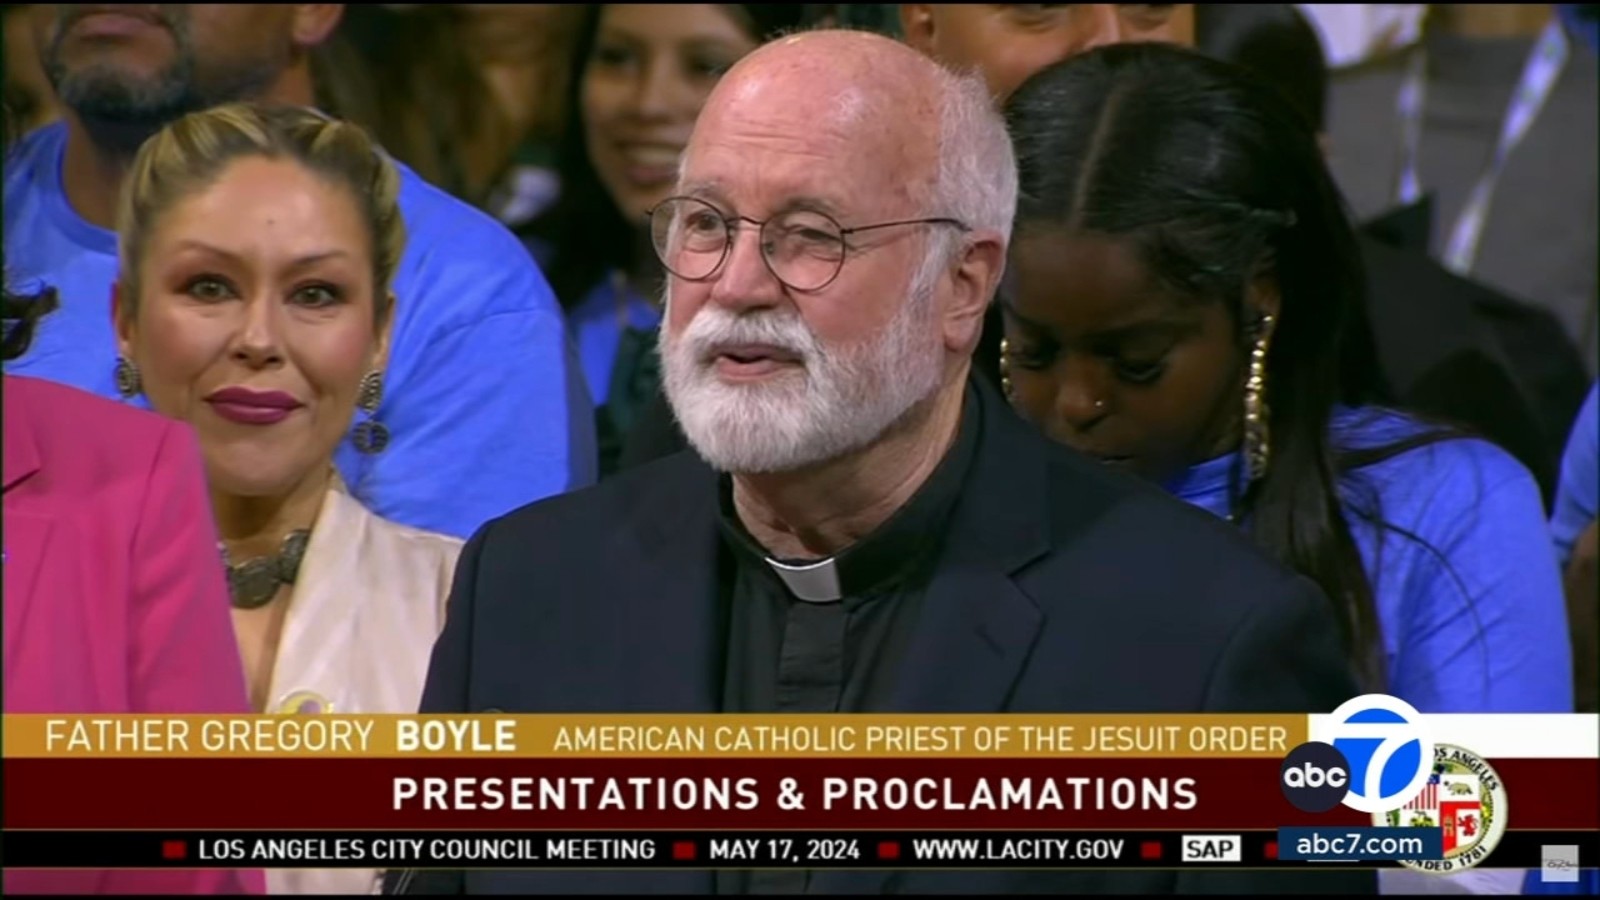 Los Angeles declares Father Greg Boyle Day to honor founder of Homeboy Industries